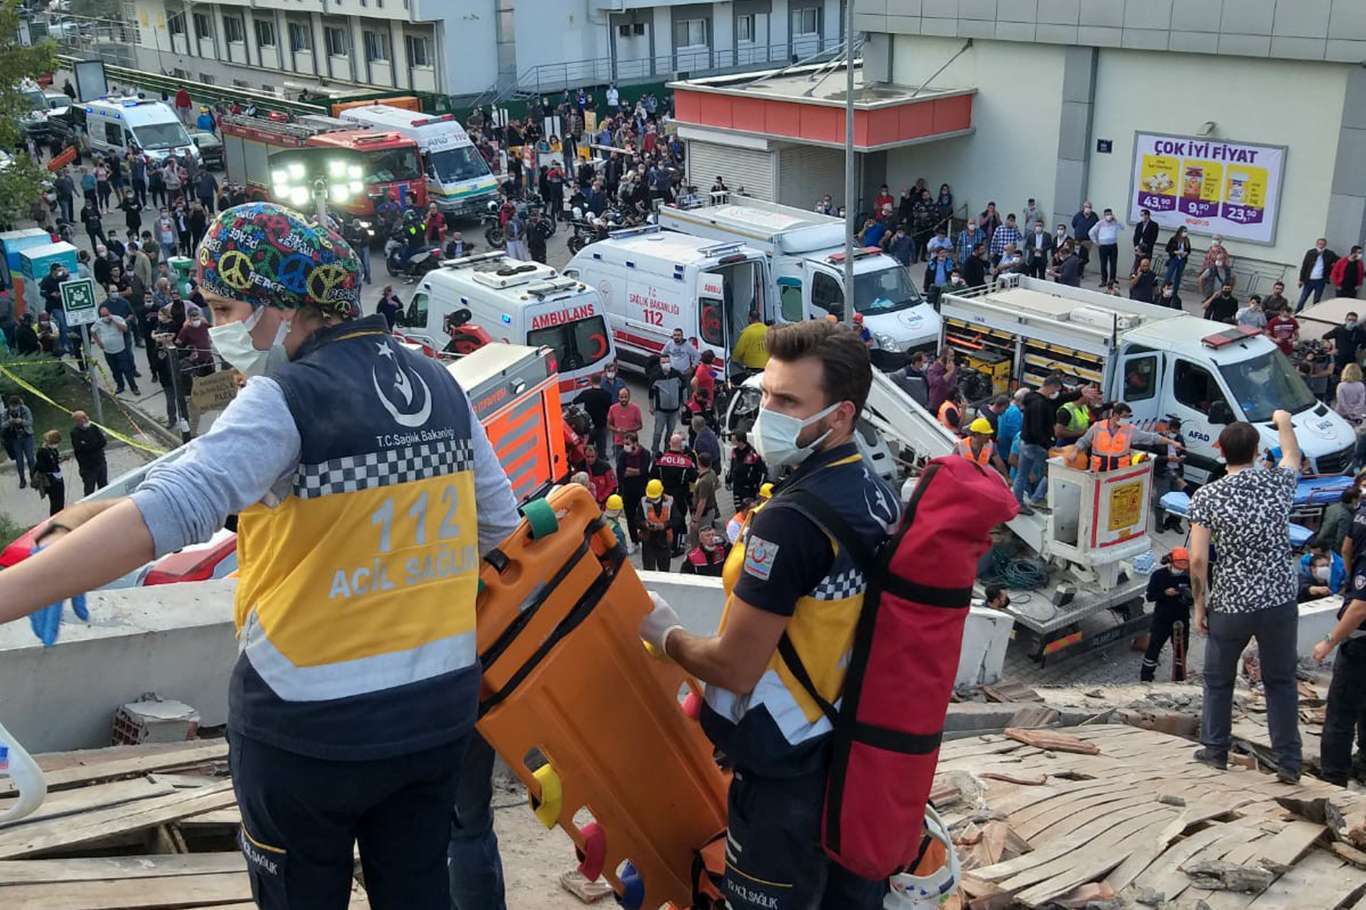 100 people rescued alive from the rubble after earthquake in Izmir, Turkey